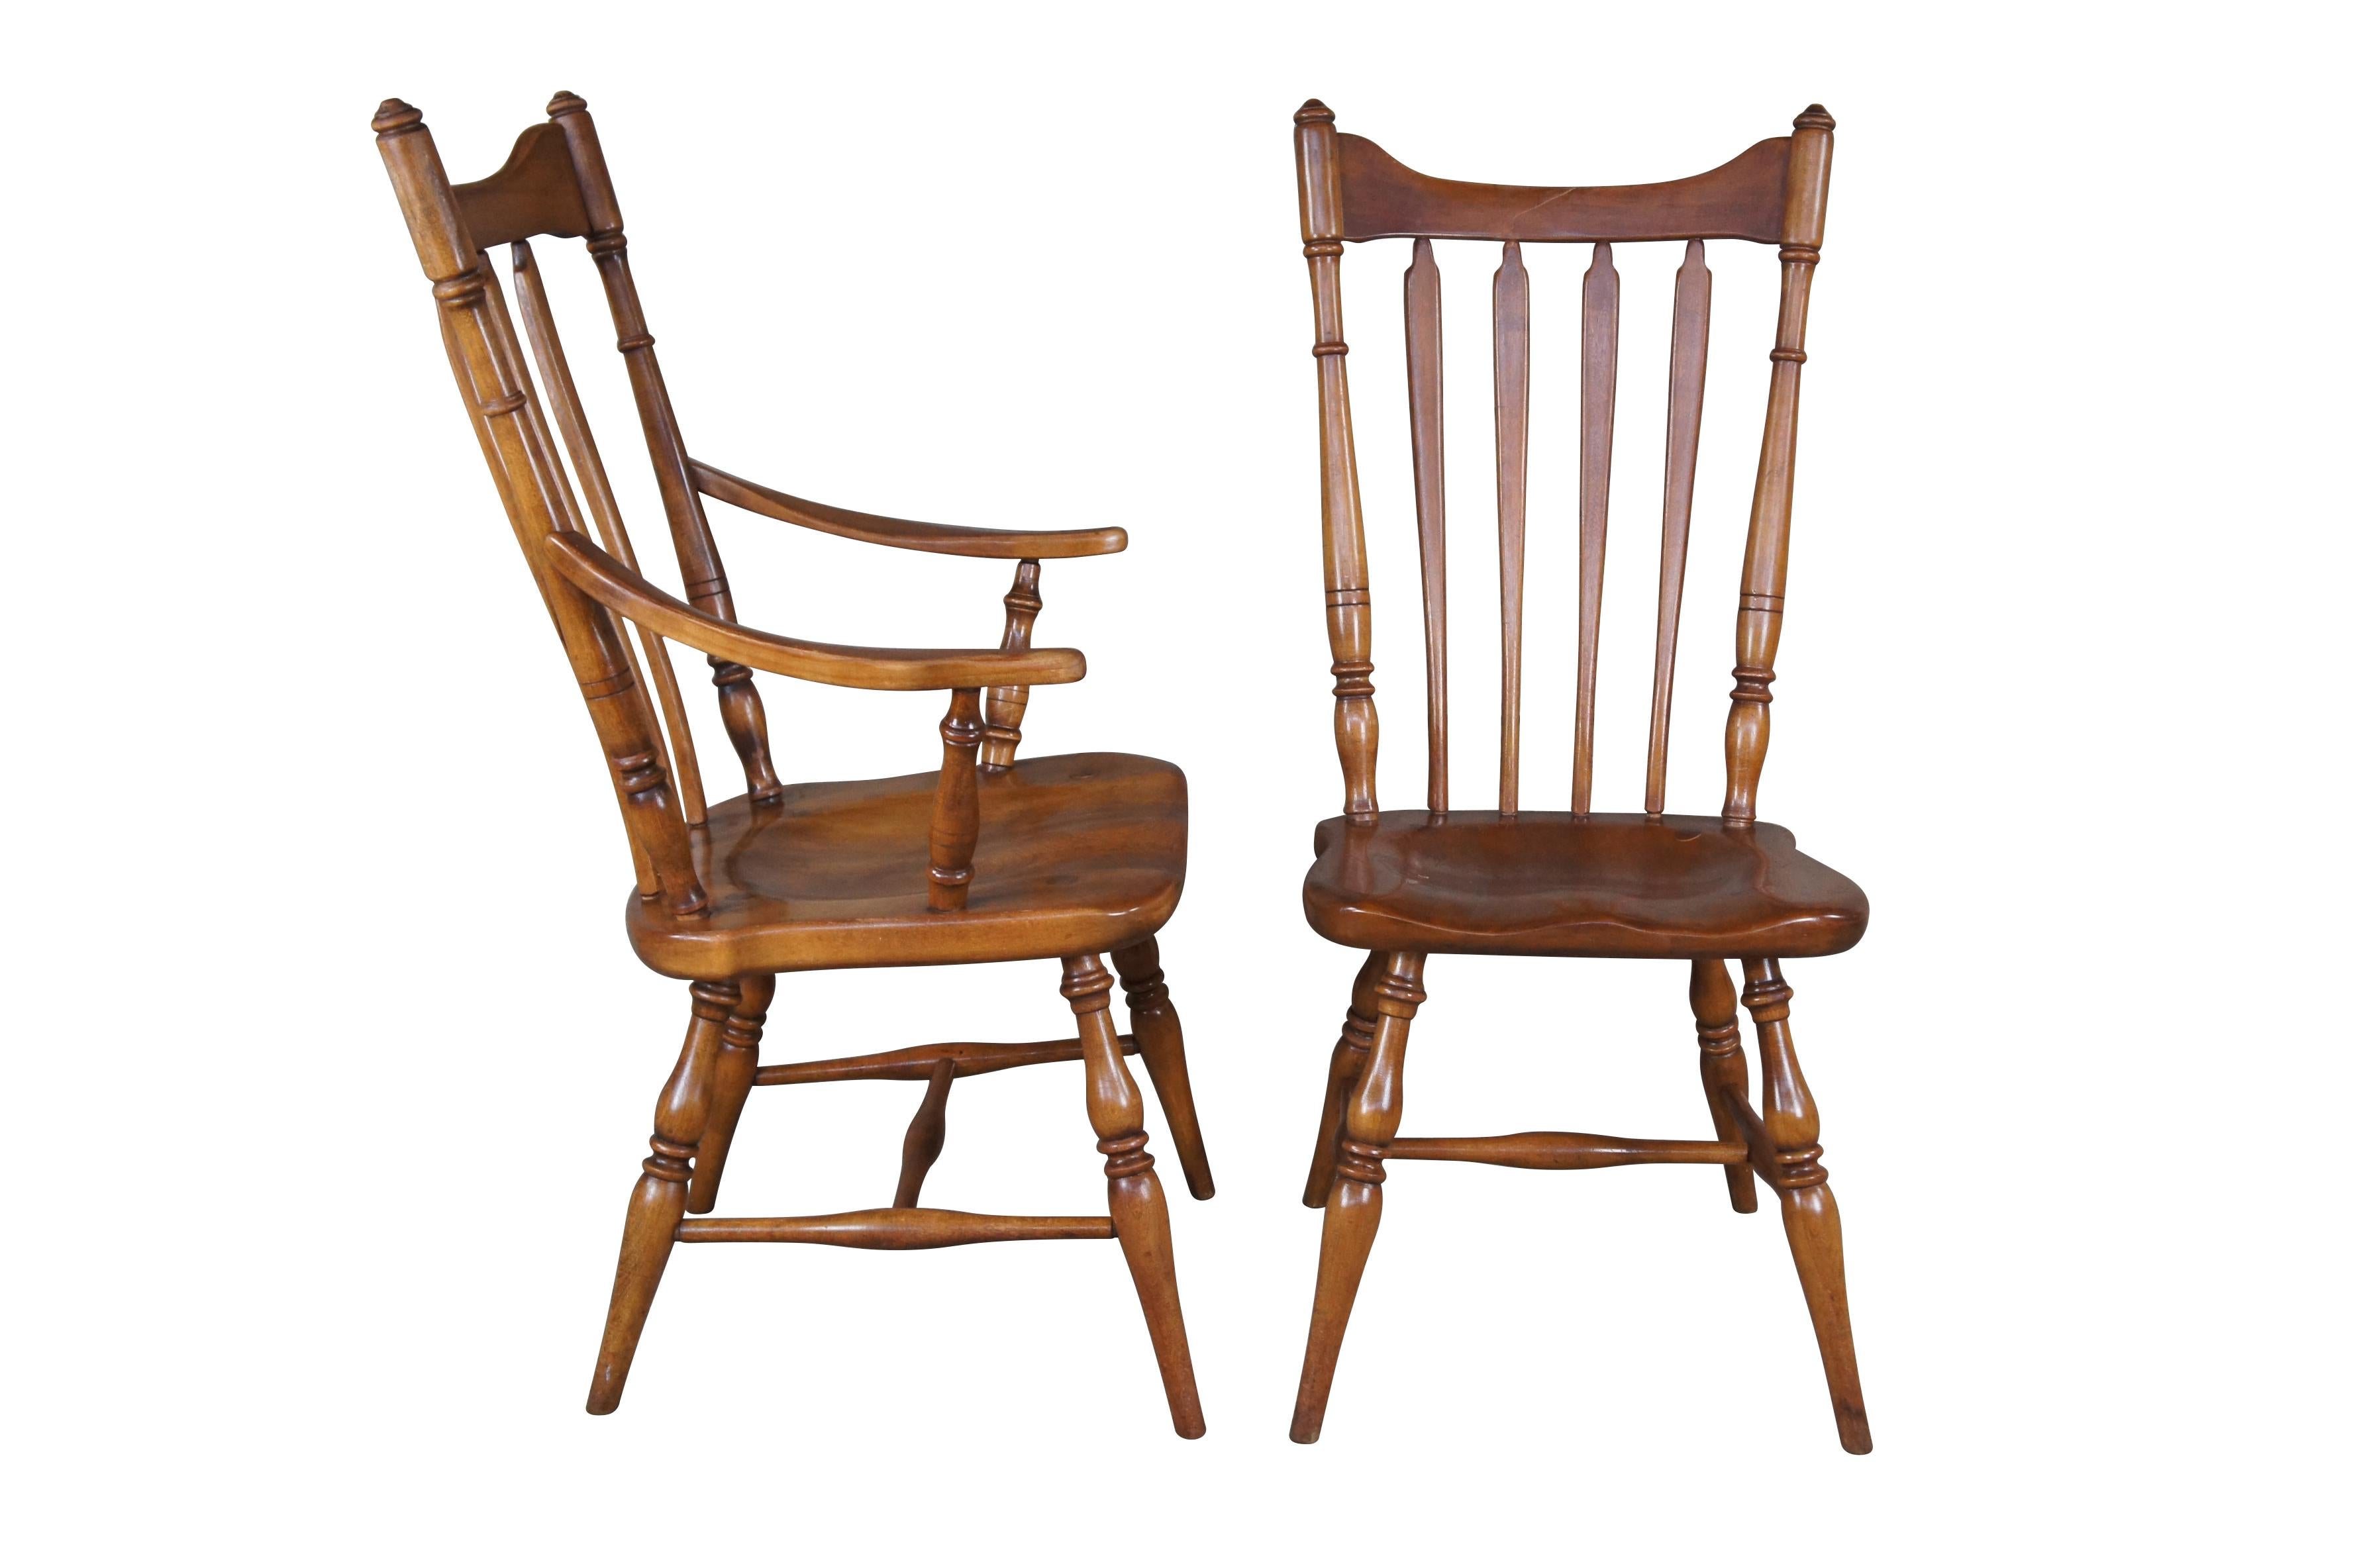 Set of four Cushman Colonial Creations dining chairs.  Crafted from maple featuring slatted backs and turned tapered posts.  One armchair, three side chairs.  5921.

The H.T. Cushman Manufacturing Company was founded in 1886 and spent close to 100